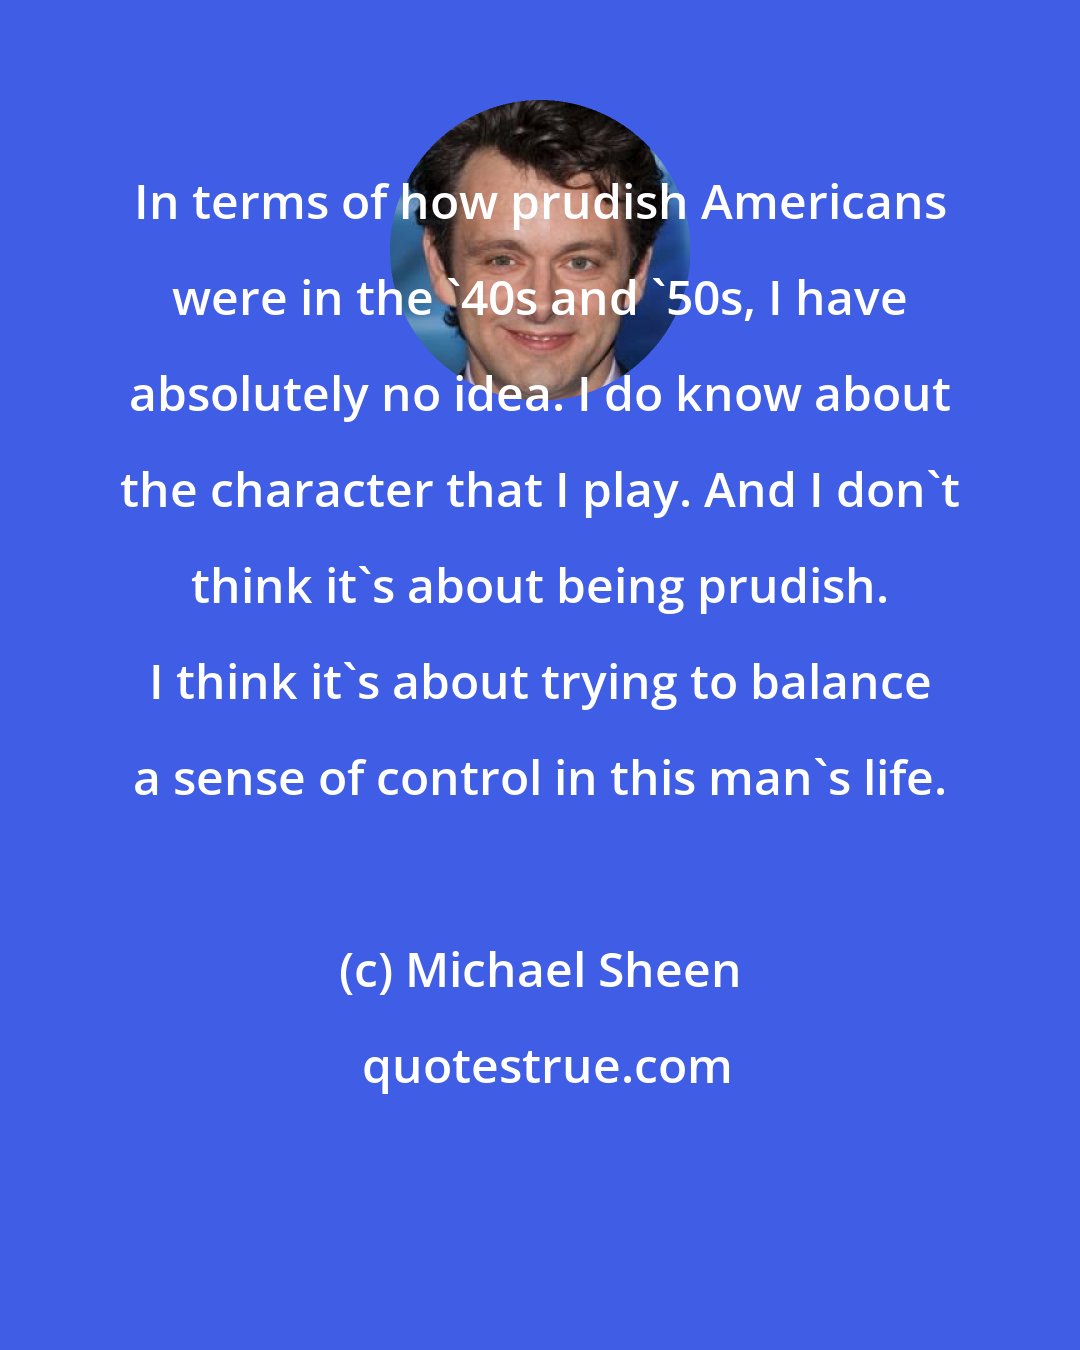 Michael Sheen: In terms of how prudish Americans were in the '40s and '50s, I have absolutely no idea. I do know about the character that I play. And I don't think it's about being prudish. I think it's about trying to balance a sense of control in this man's life.